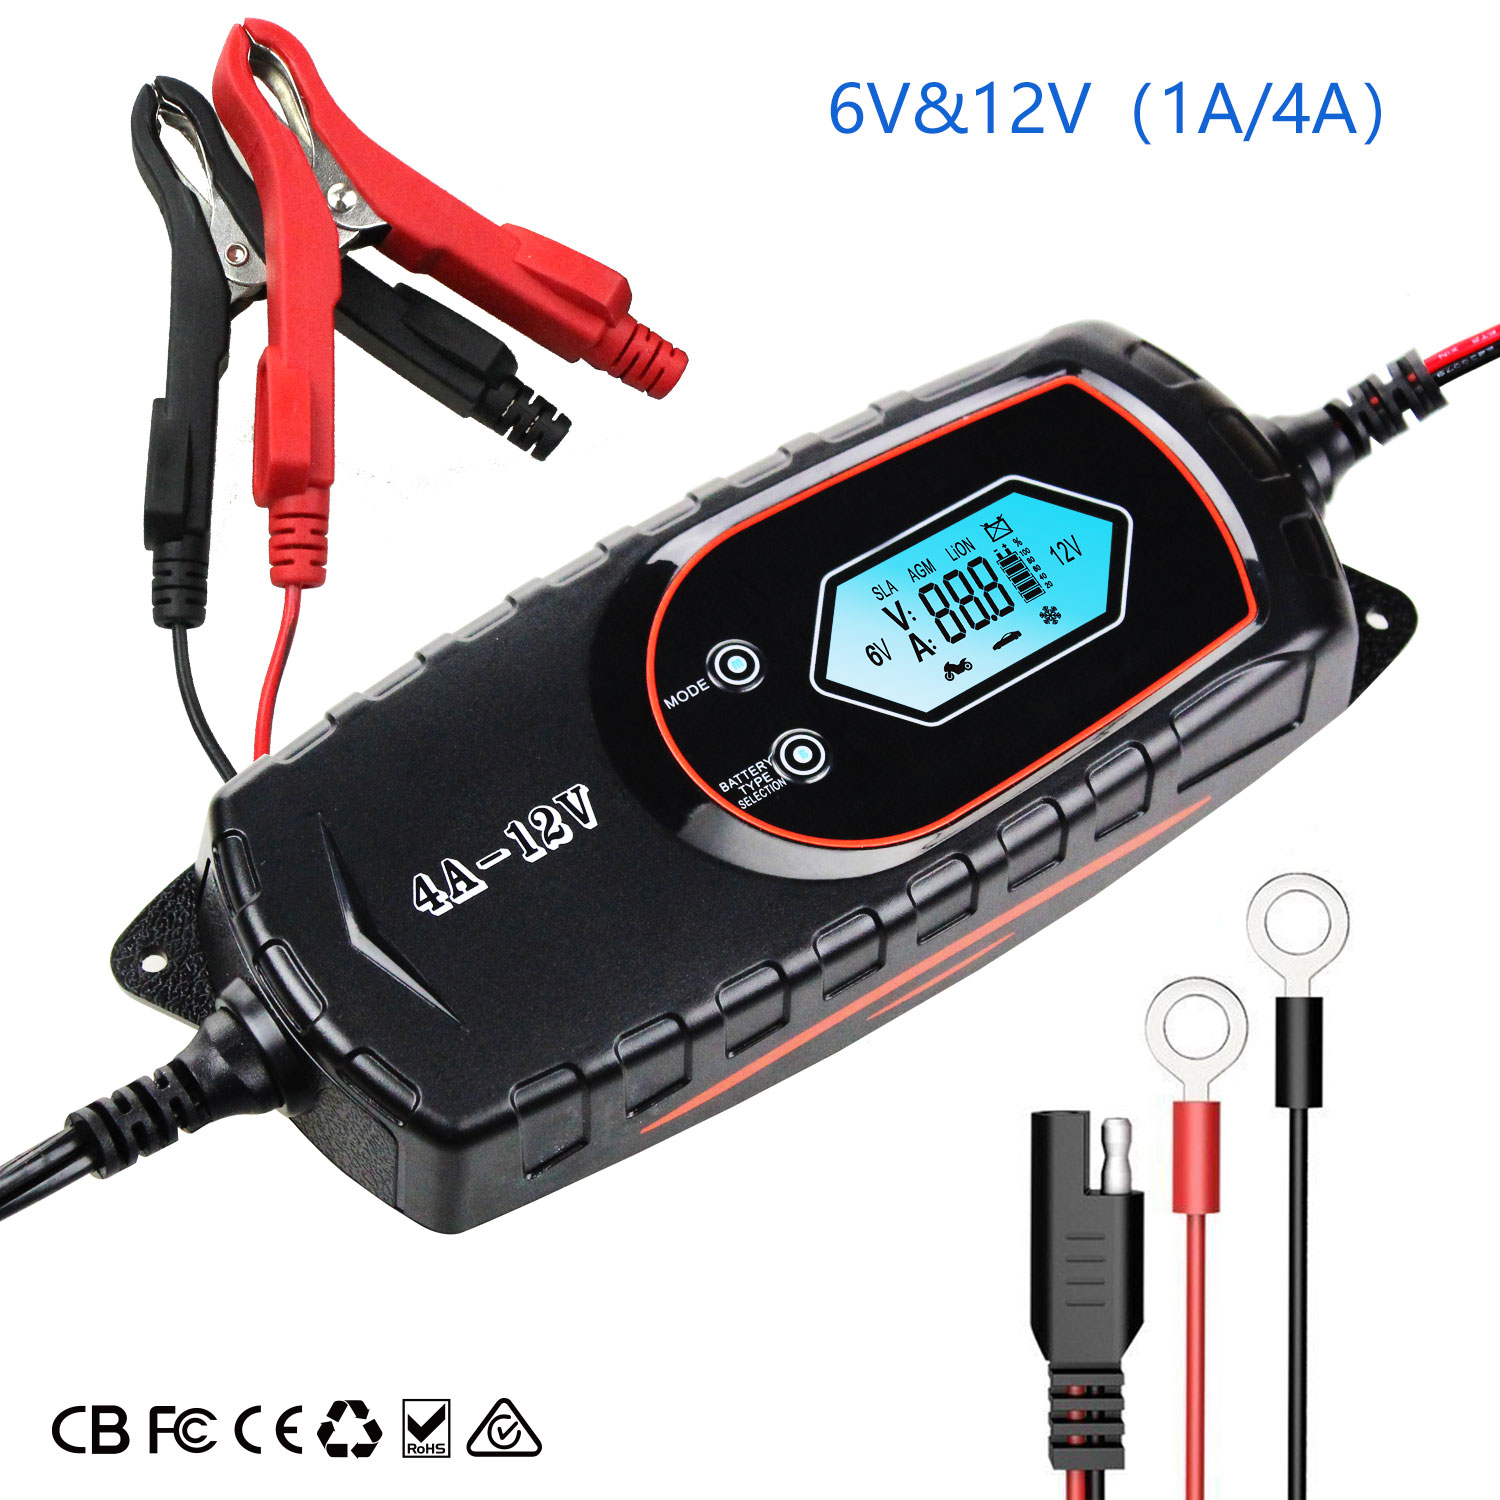 Portable car battery charger 12V, can charge car battery